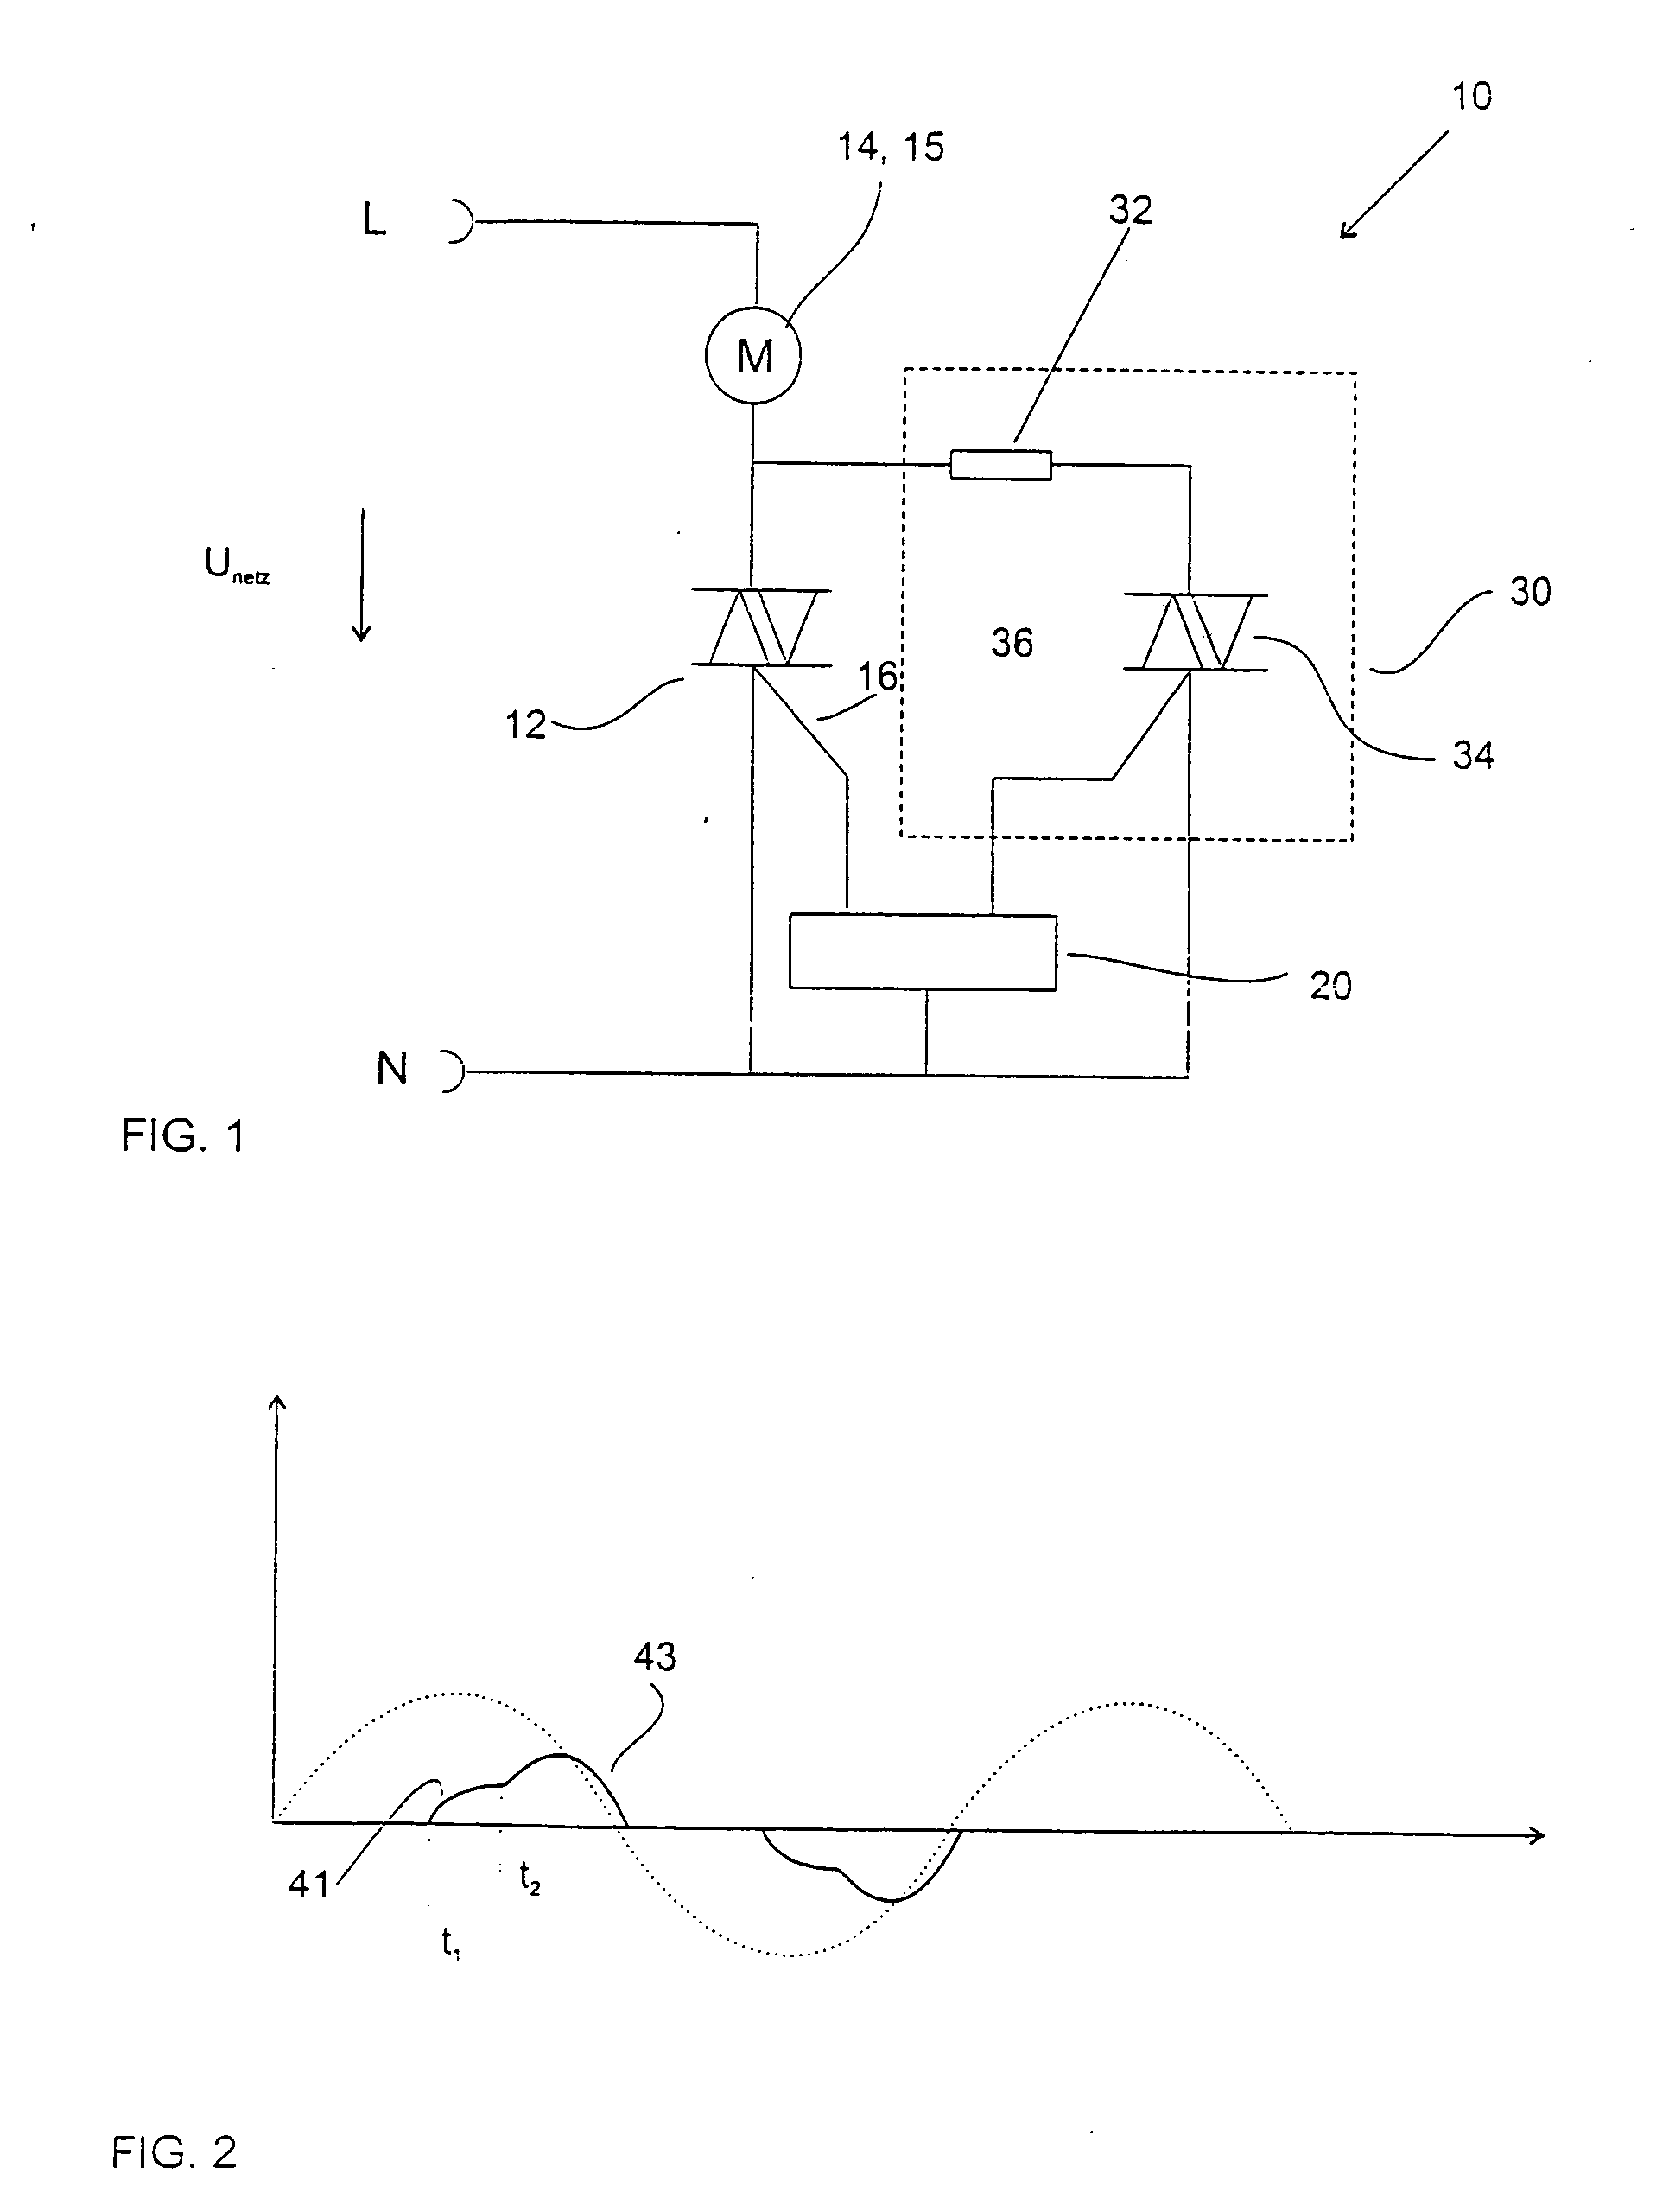 Apparatus for controlling the power of an AC voltage supplying an electrical consumer by phase control and method for reducing harmonics